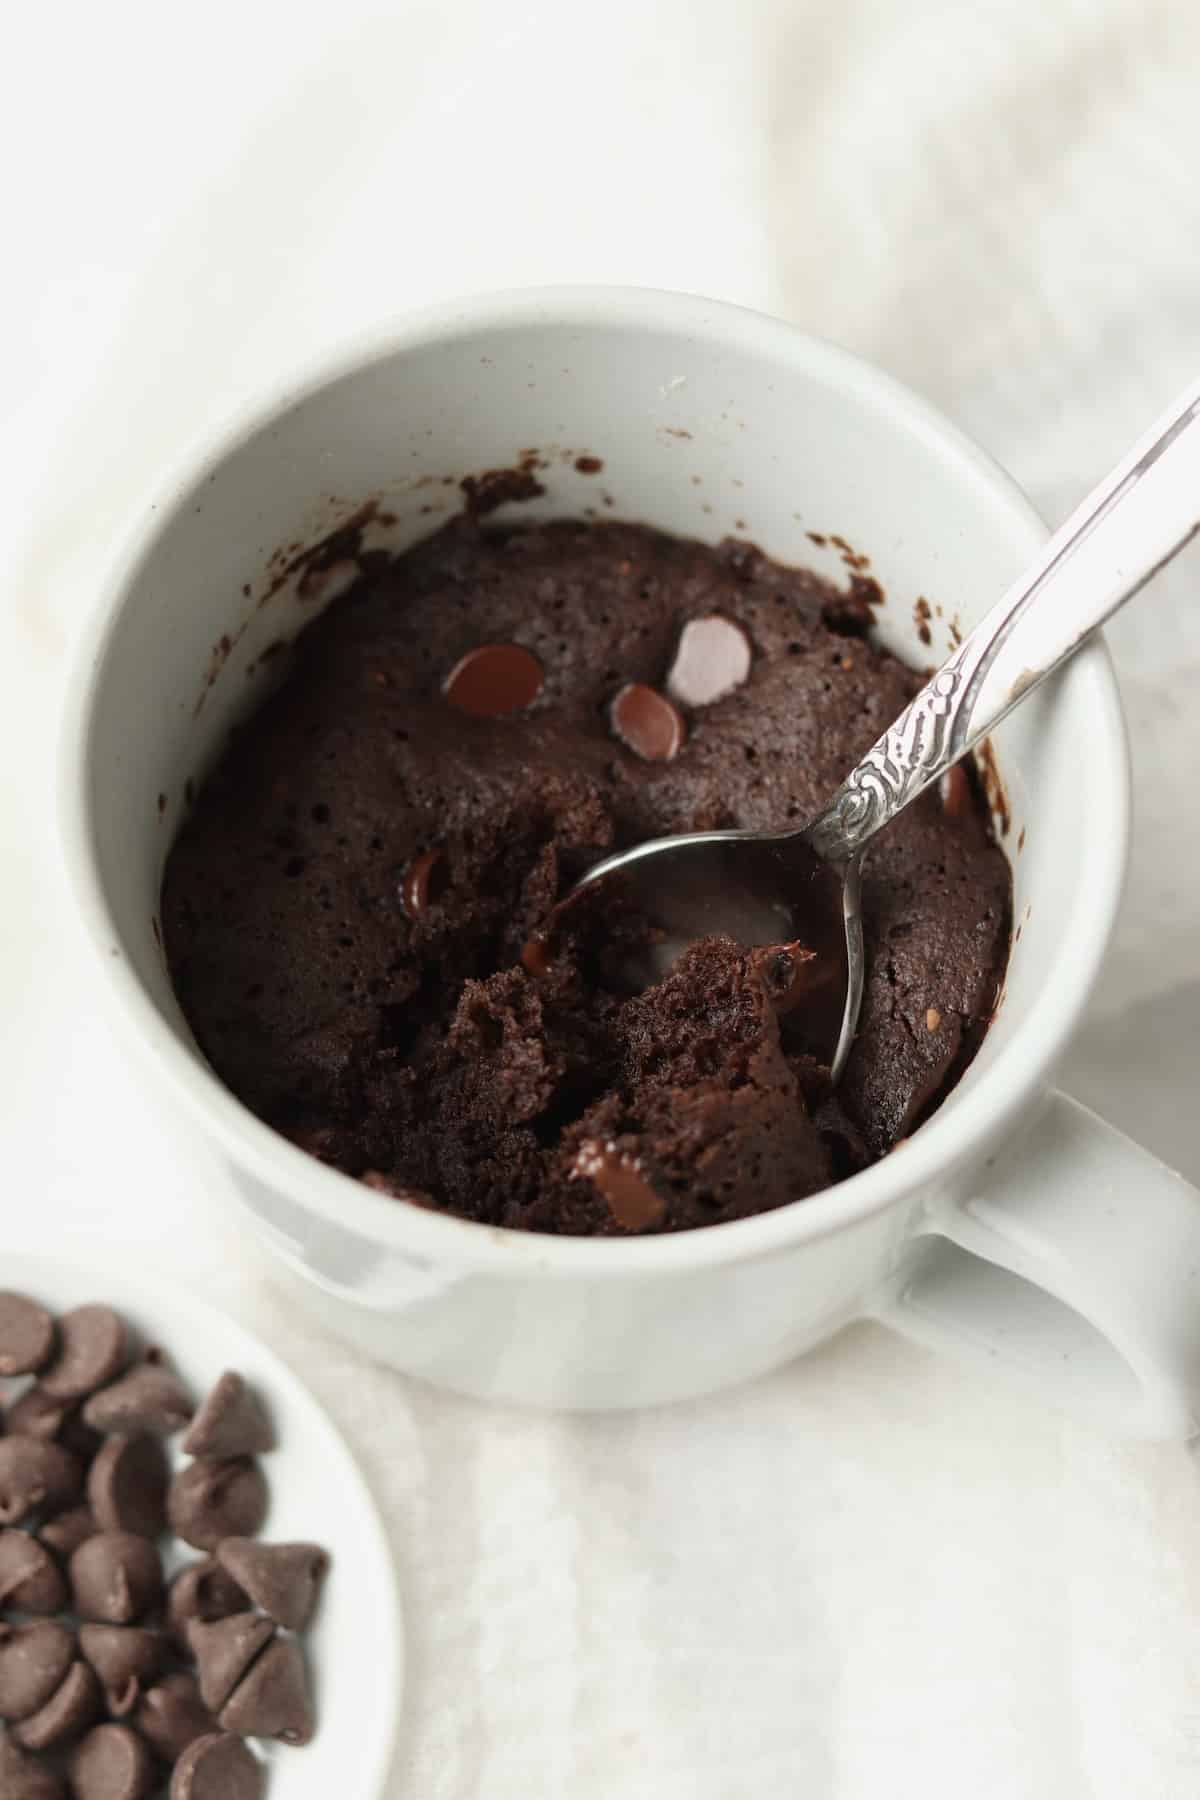 spoon in mug cake with extra chocolate chips